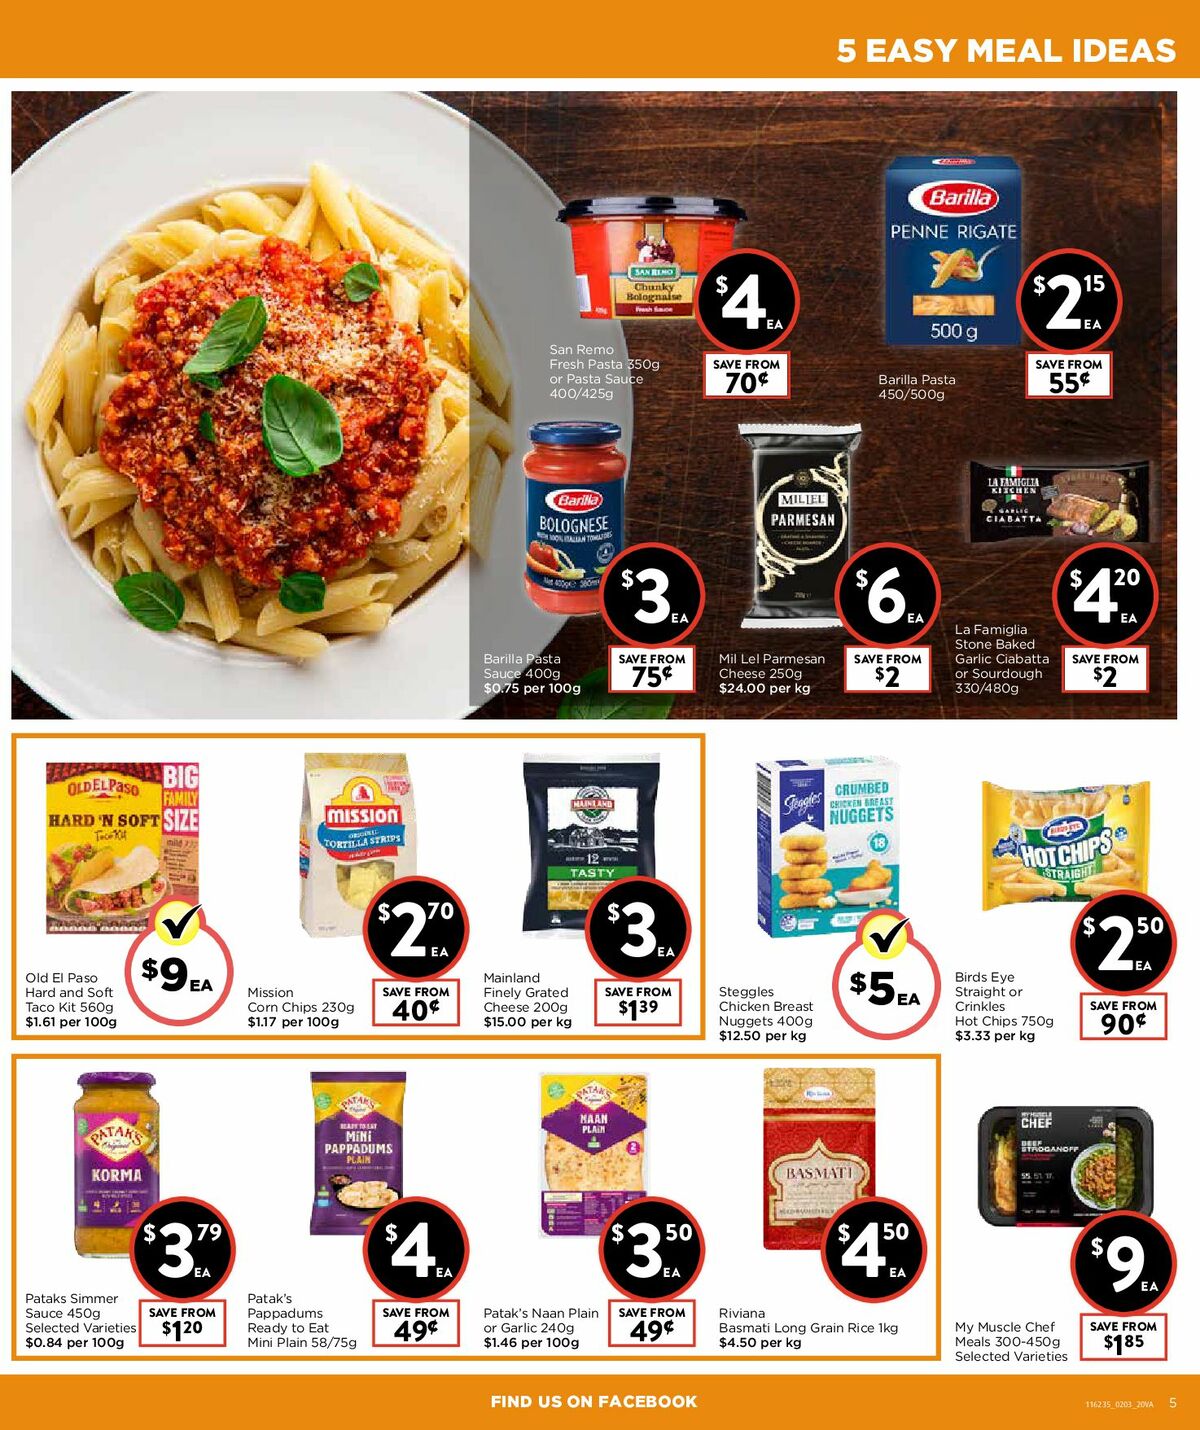 FoodWorks Supermarket Catalogues from 2 March